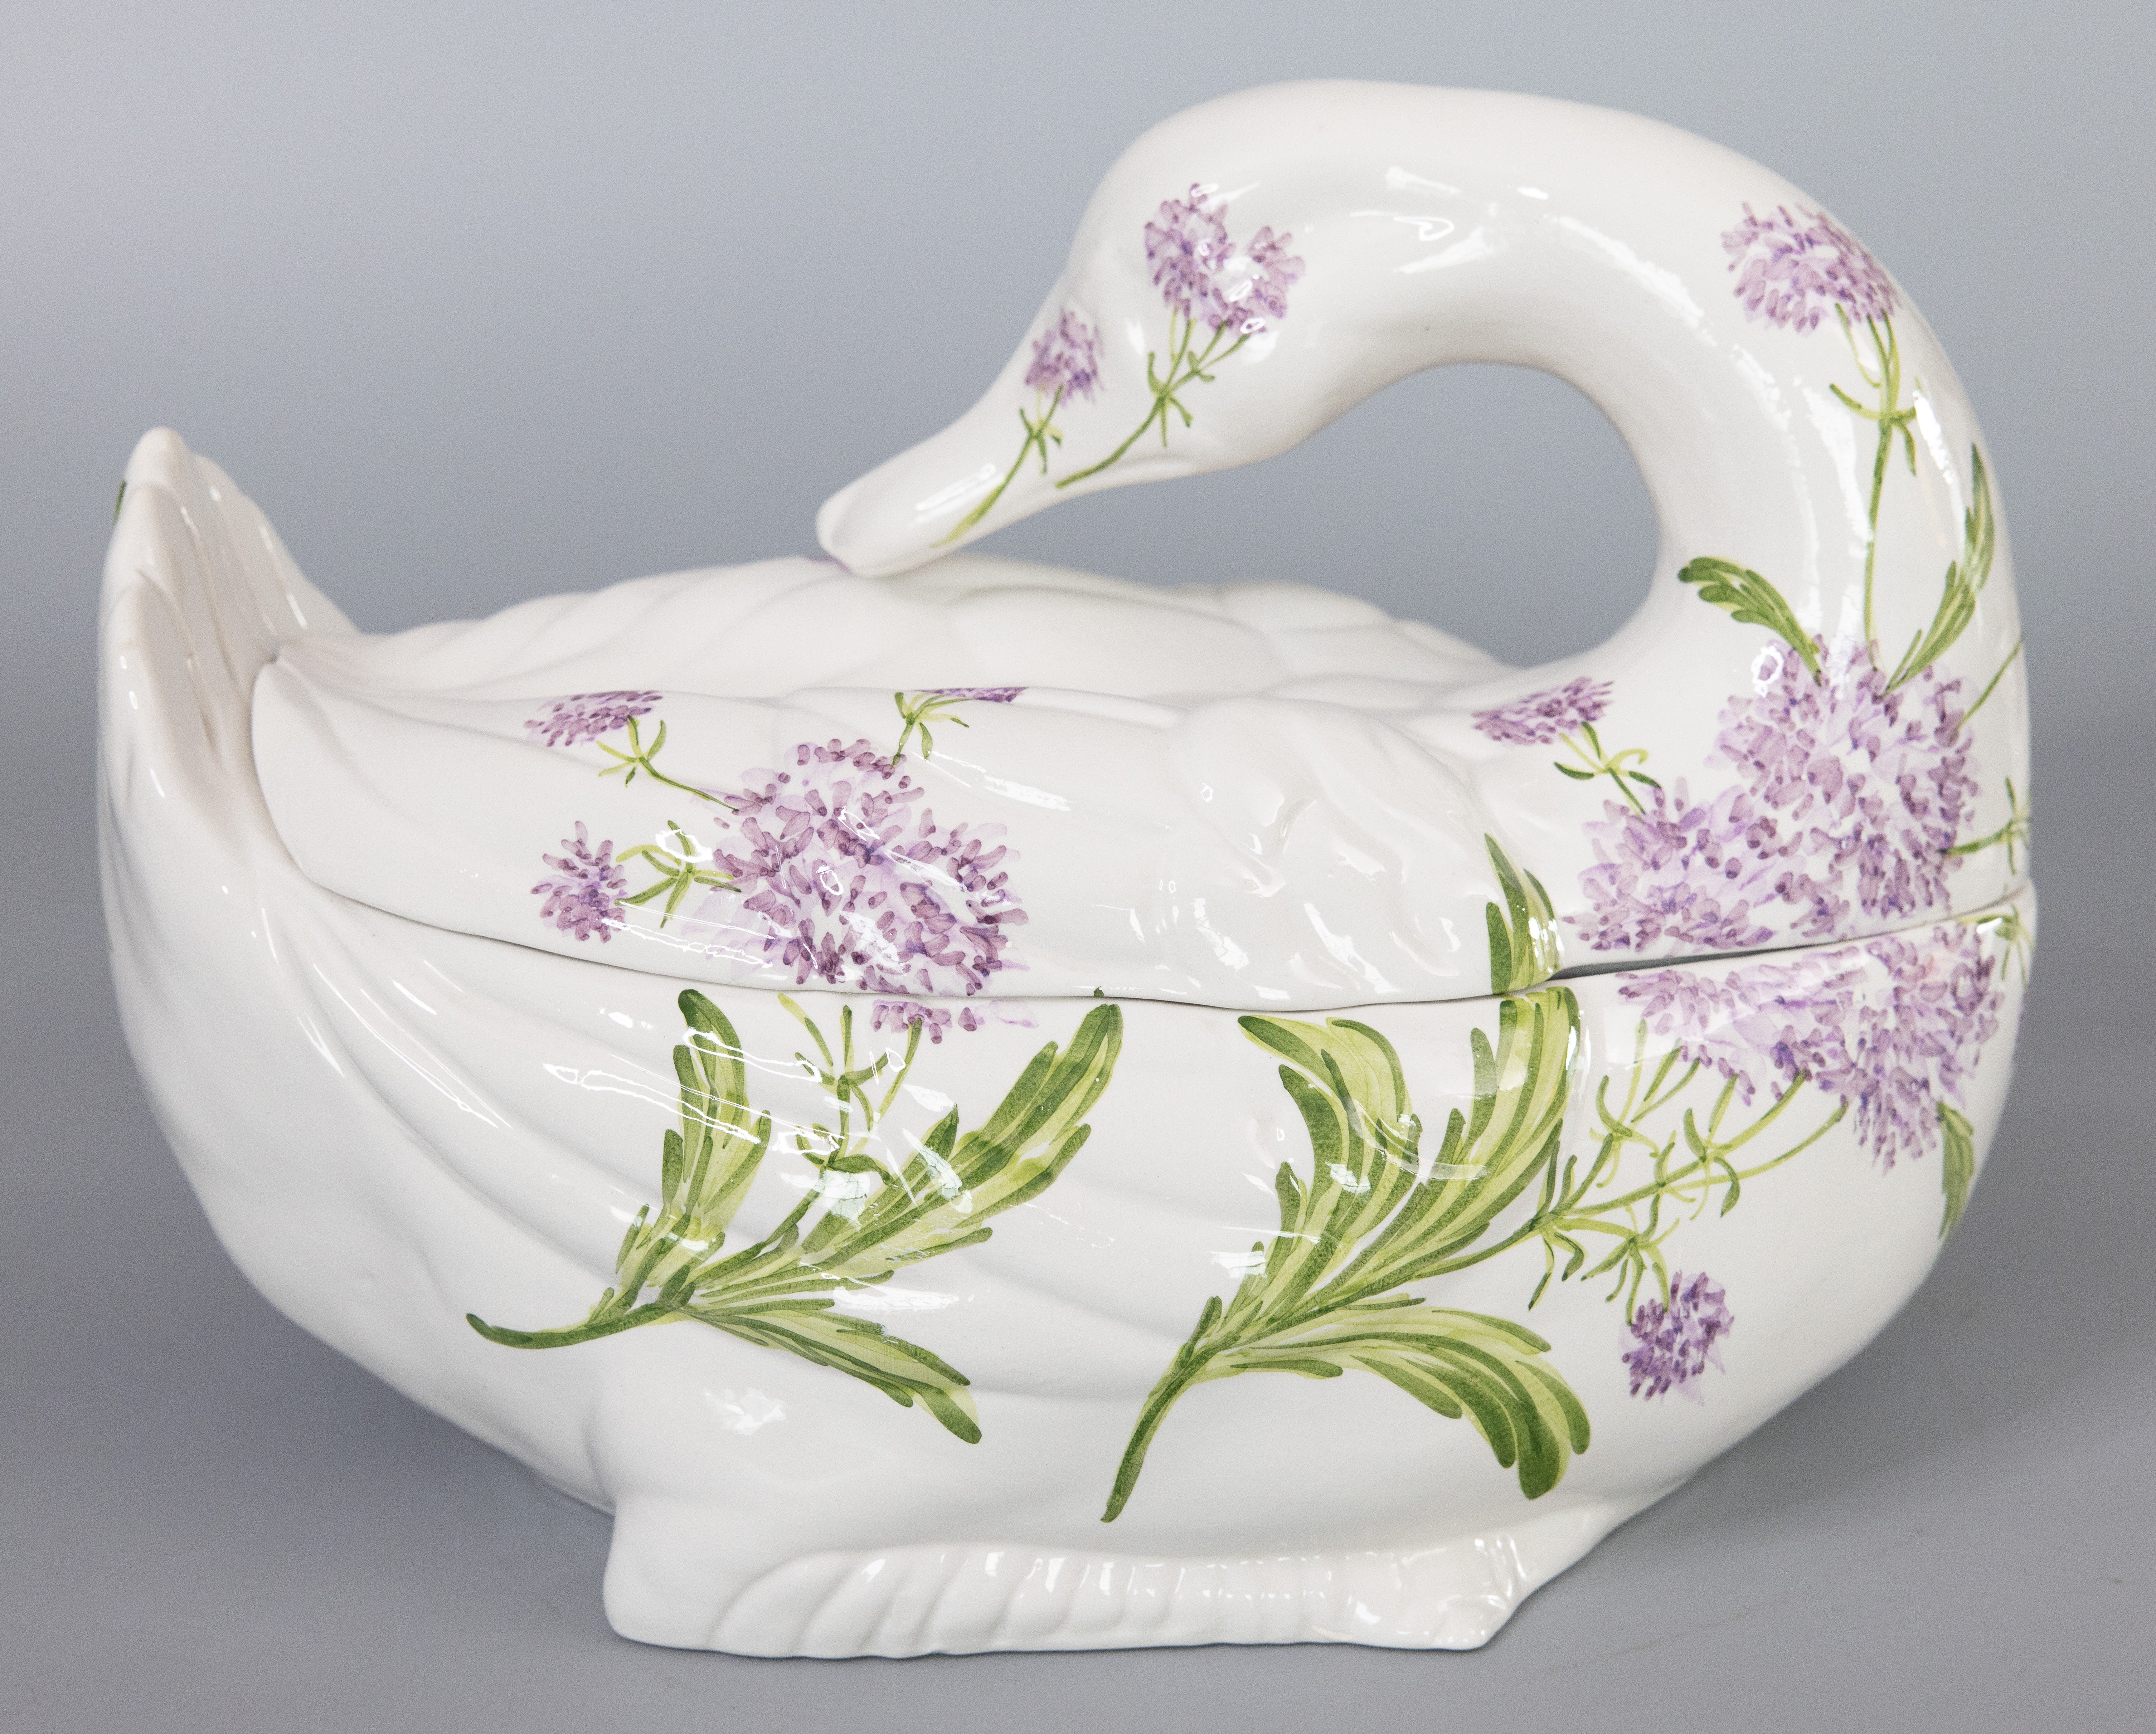 A lovely Italian ceramic swan floral soup tureen. Maker's mark on reverse. This gorgeous tureen is in the form of a graceful swan with beautiful hand painted flowers. It would perfect for serving or for display.

DIMENSIONS
12